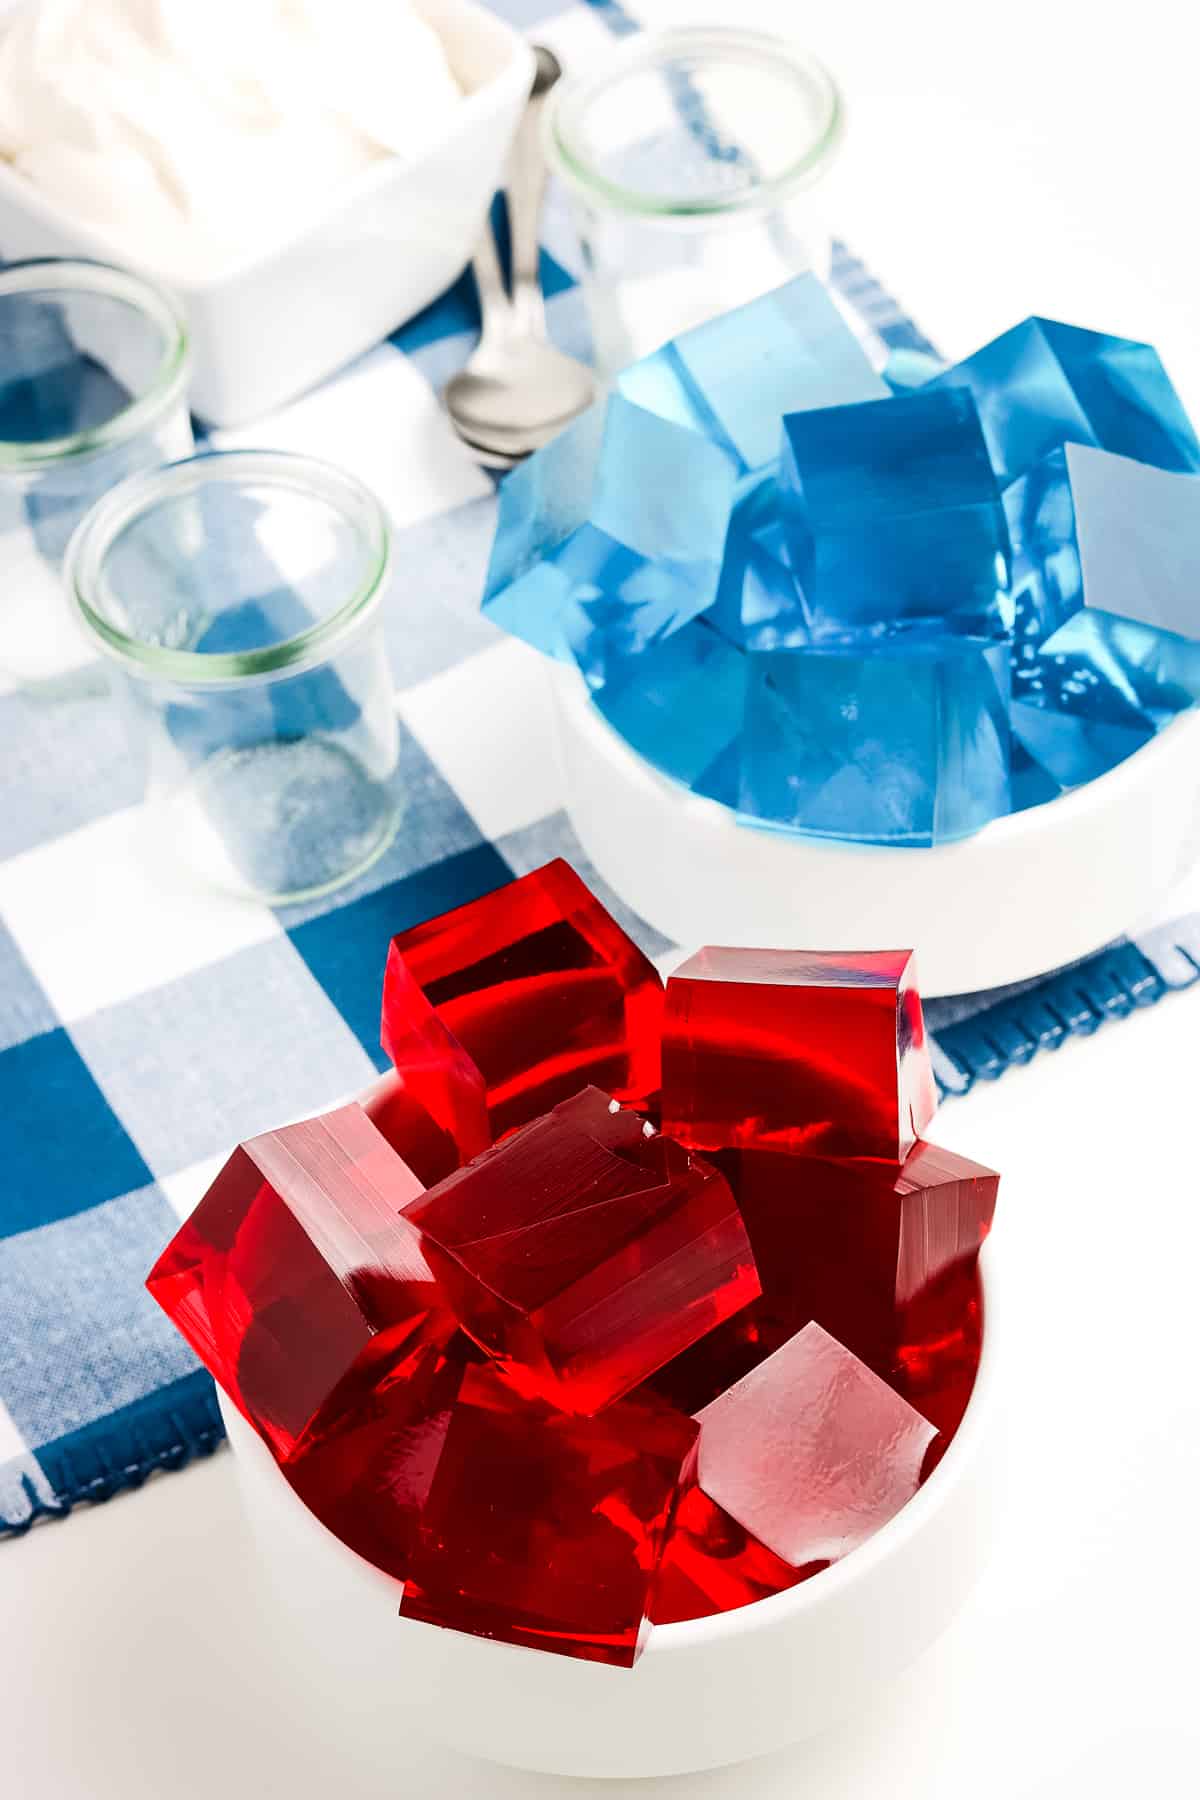 Cut cooled jello into cubes